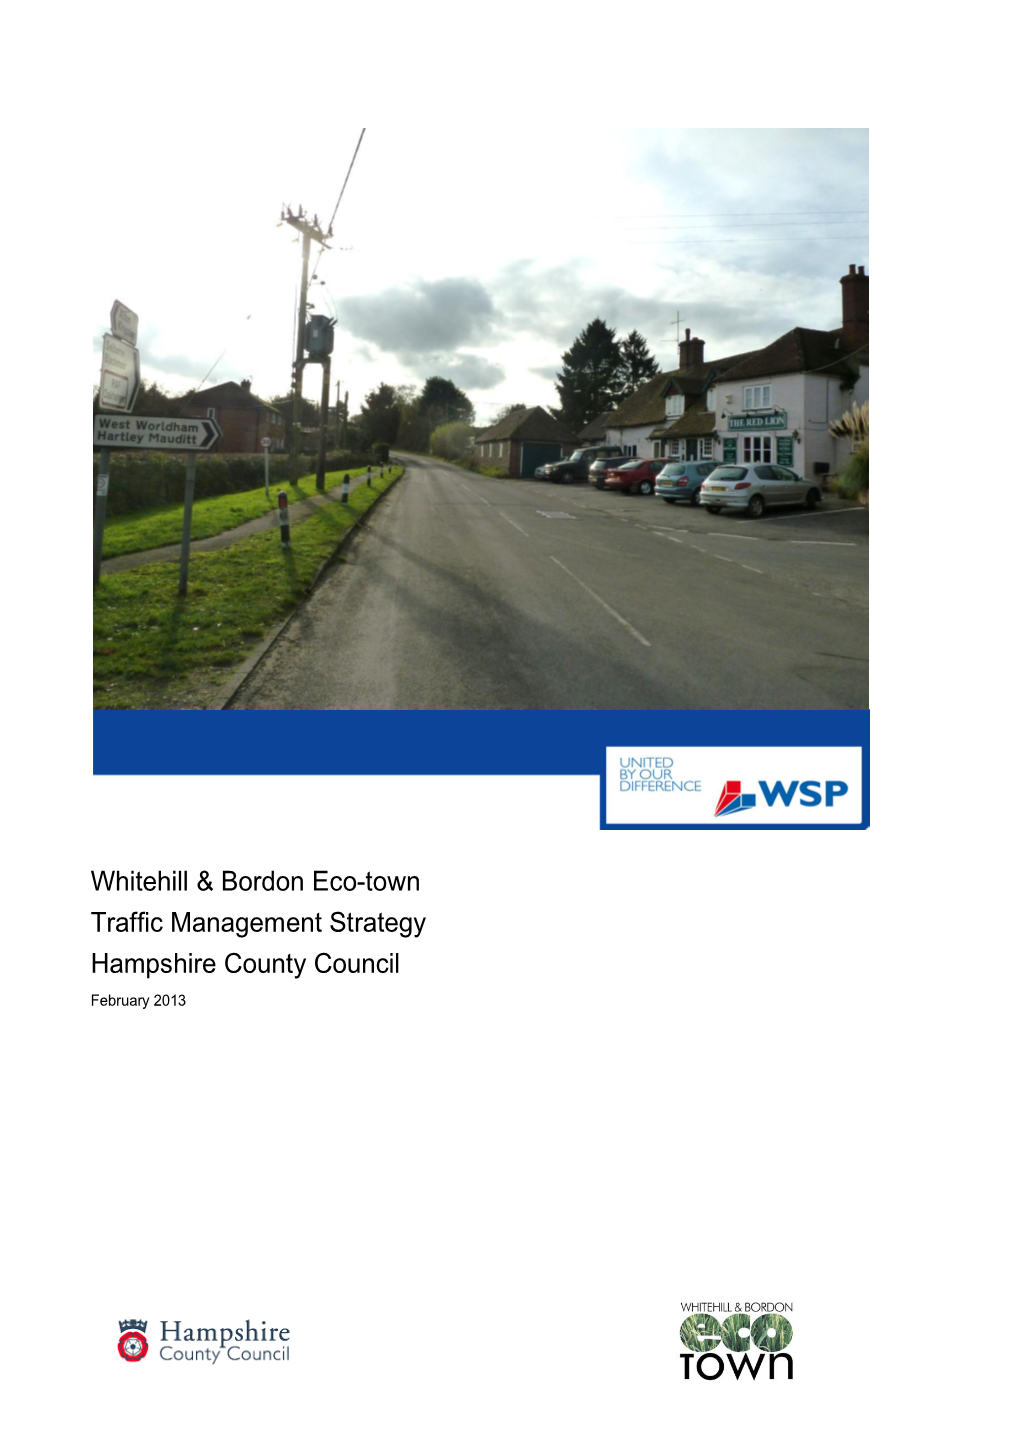 Whitehill & Bordon Eco-Town Traffic Management Strategy Hampshire County Council